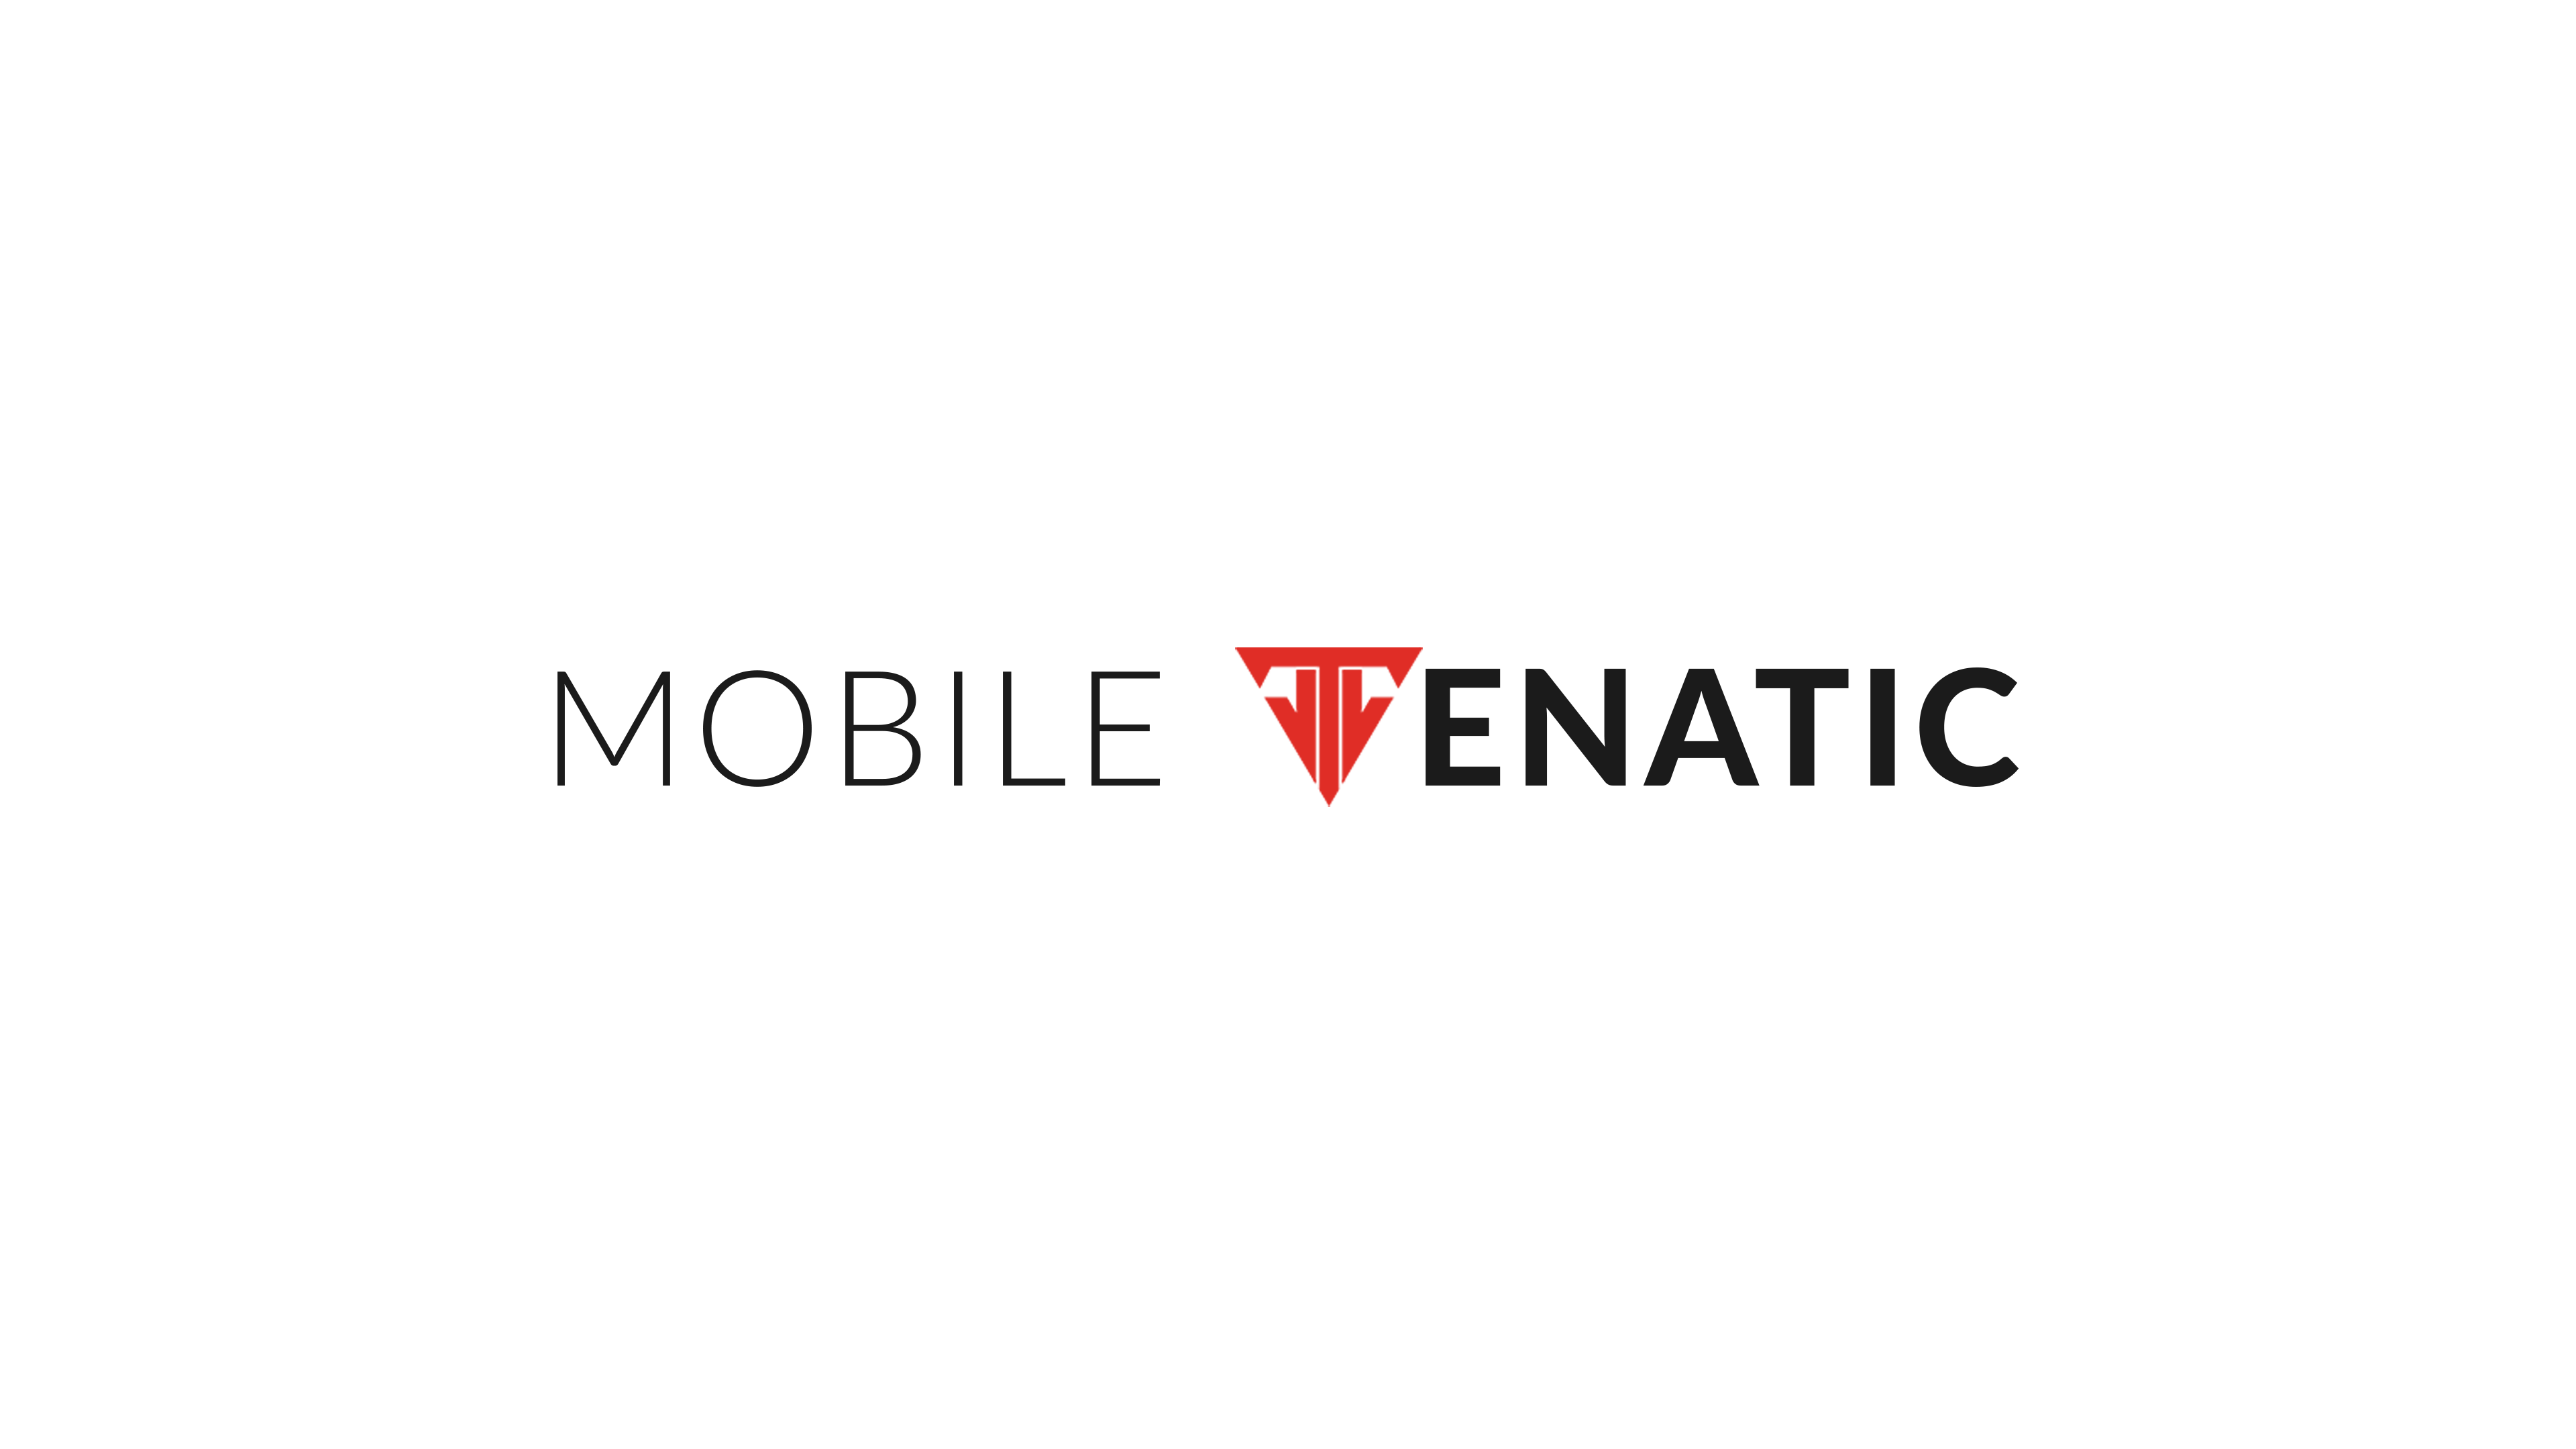 Introducing Mobile Venatic™ - Obsessed Mobile Hunter